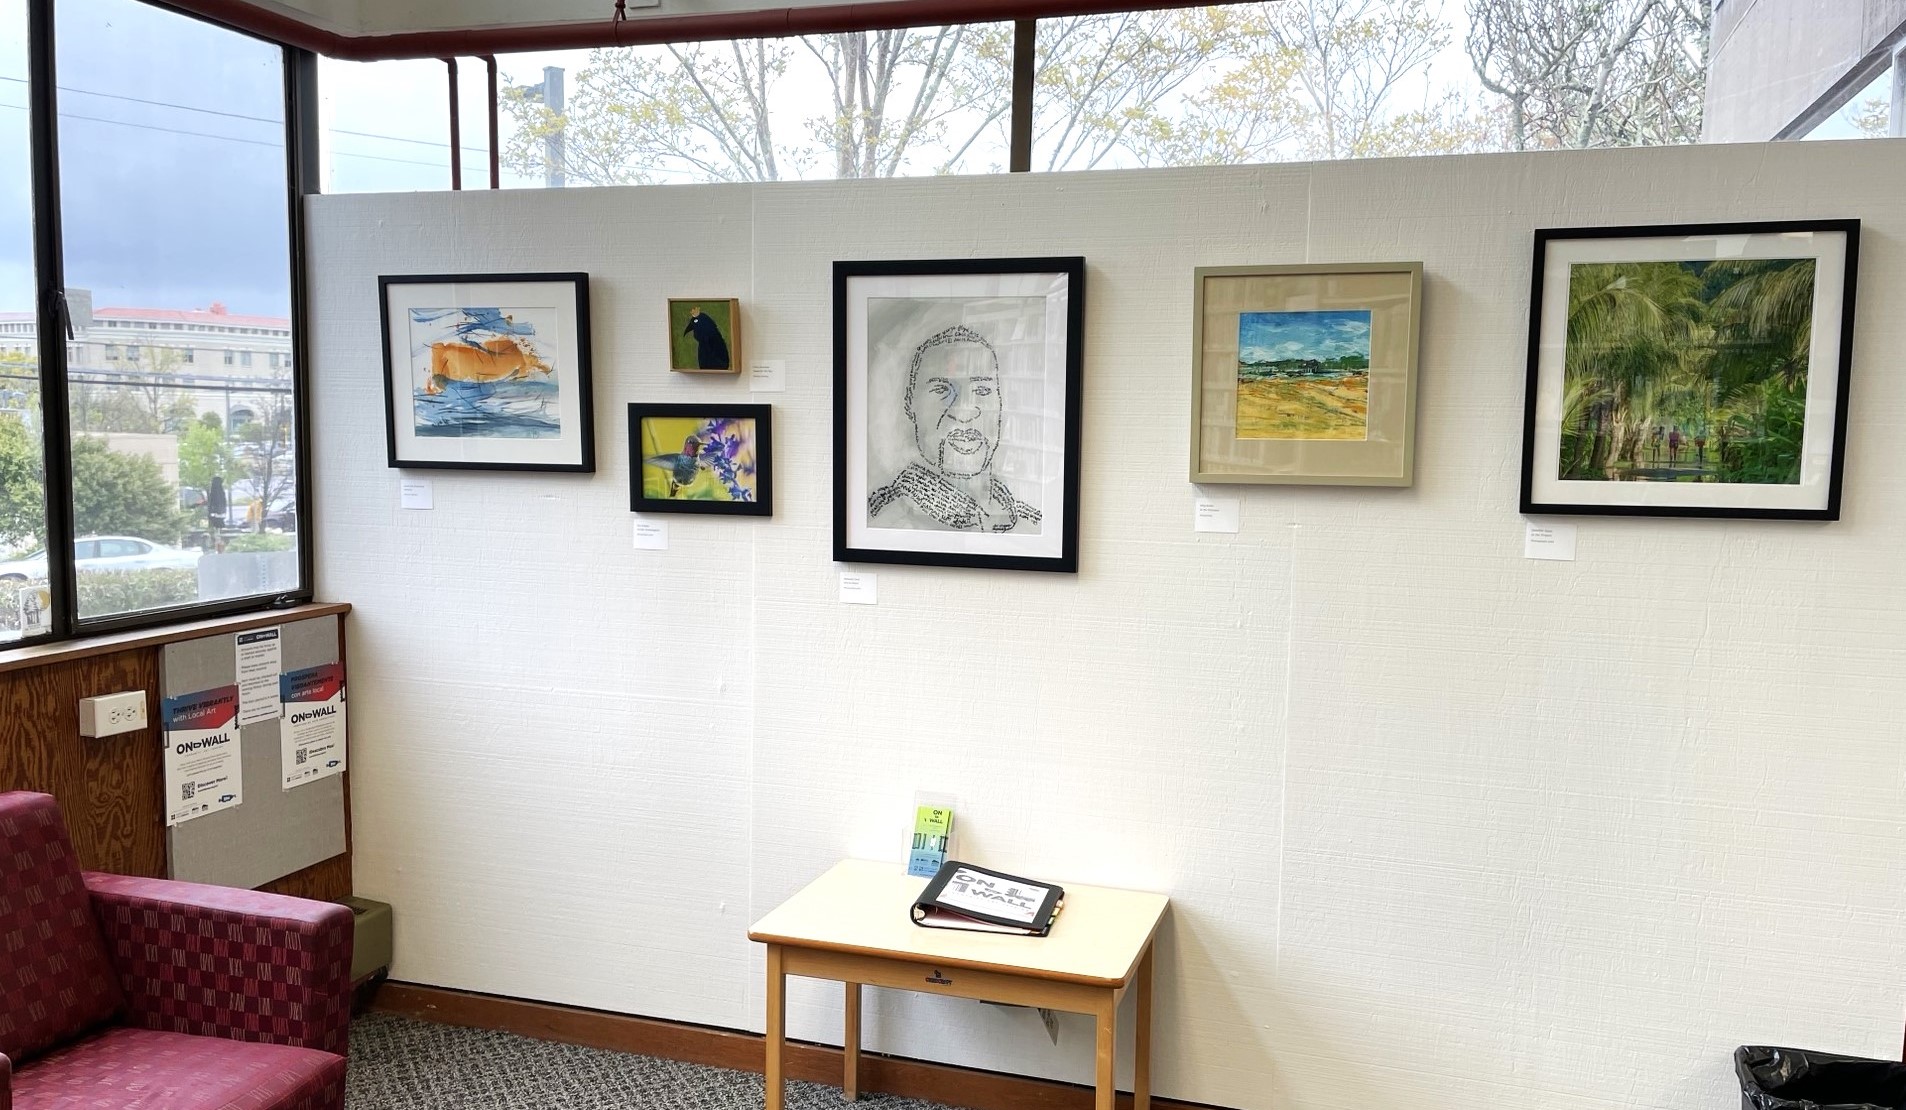 Works of art are displayed on the wall of a library.